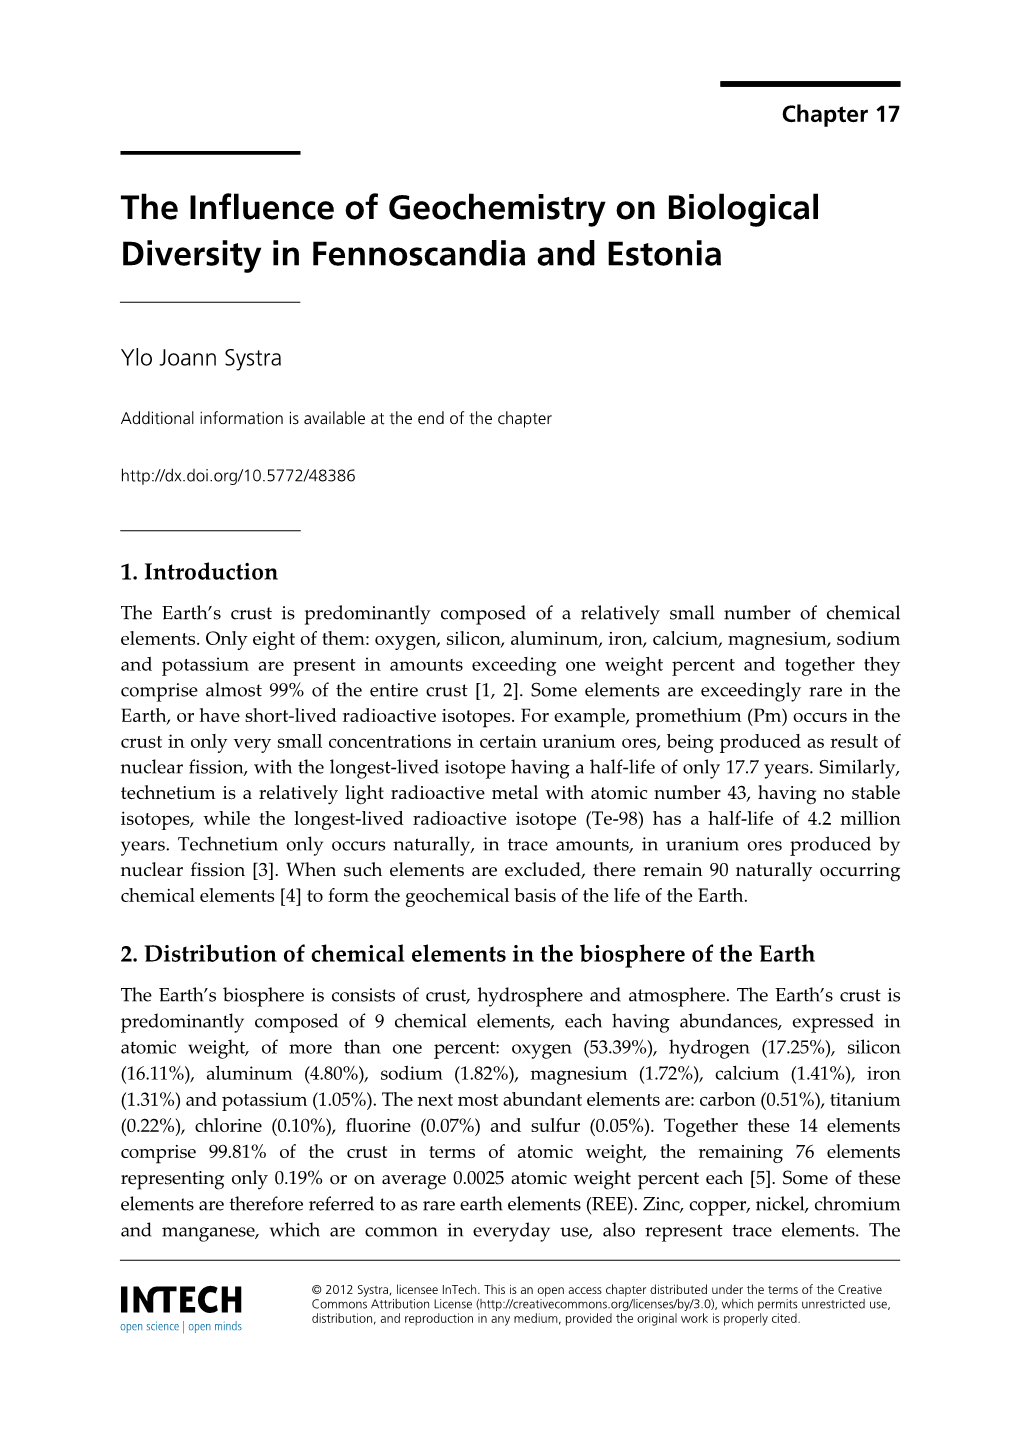 The Influence of Geochemistry on Biological Diversity in Fennoscandia and Estonia